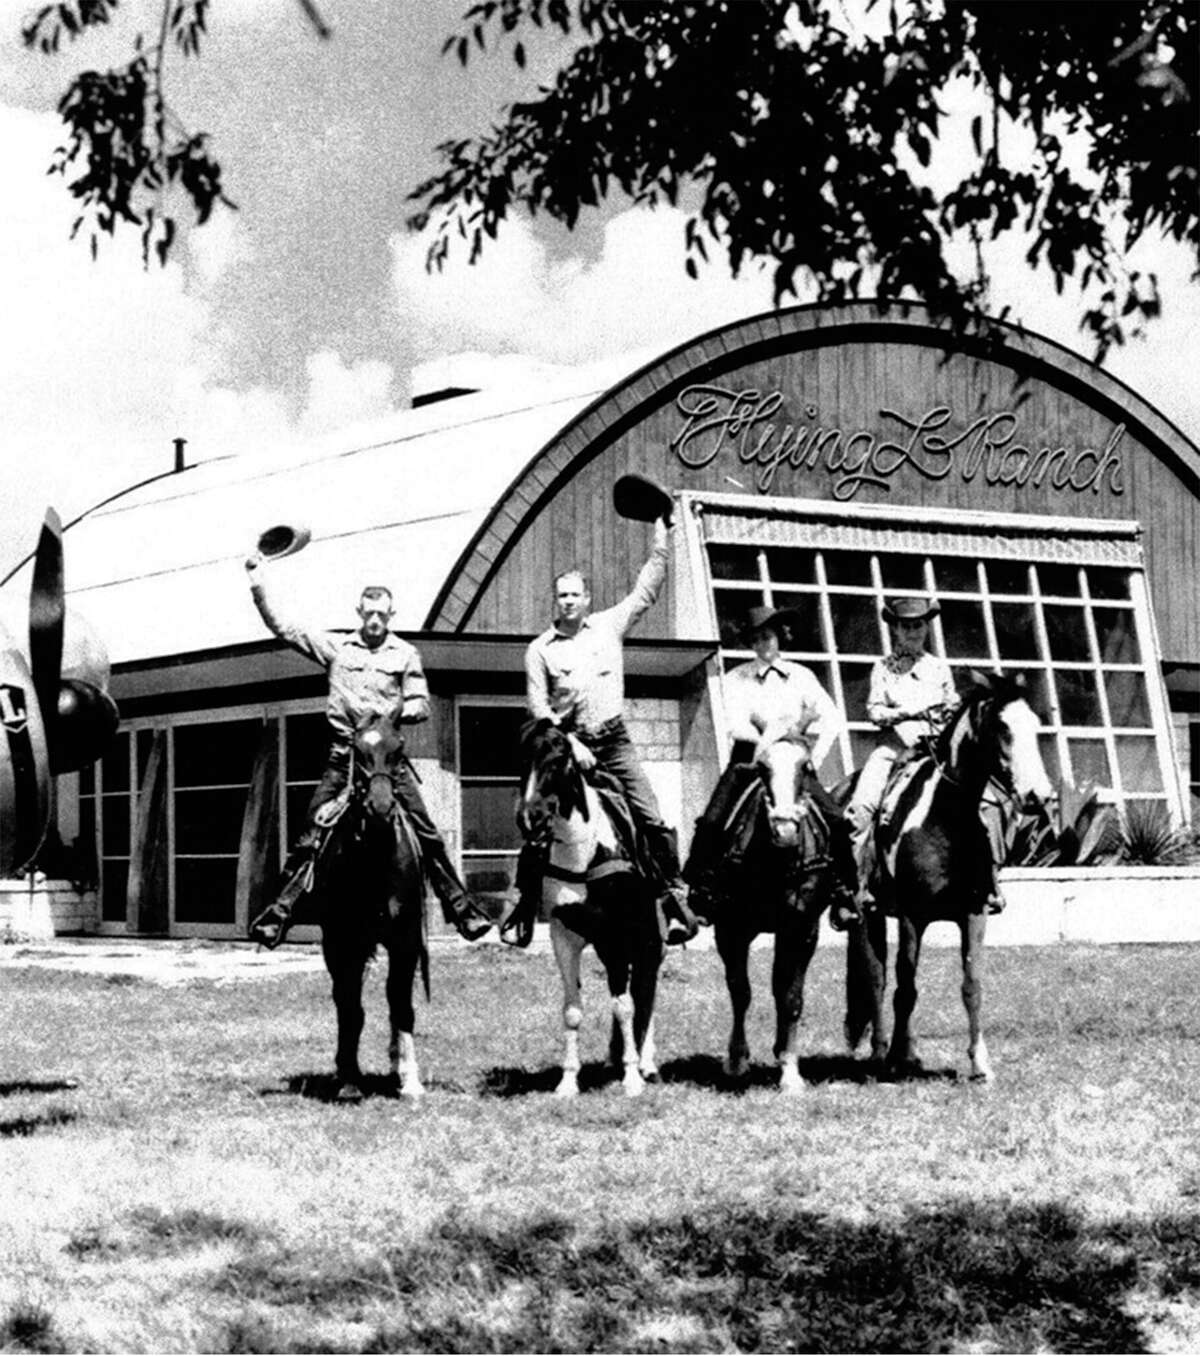 Wranglers gather in front of the pilots' lounge at the Flying L Ranch in 1948. When the Flying L opened in 1947, it had its own airport.